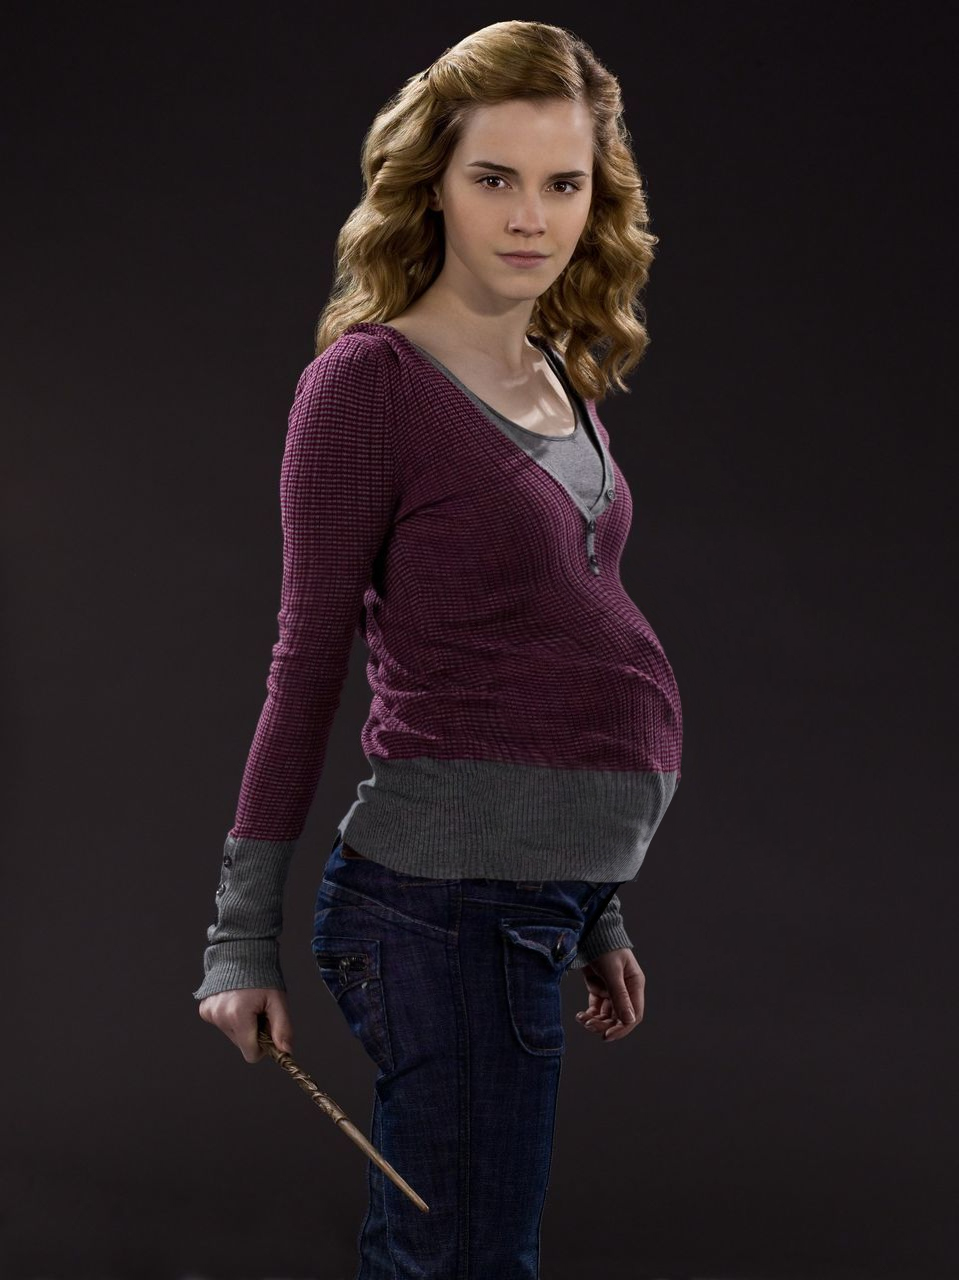 Hermione Granger Belly By Whateven12